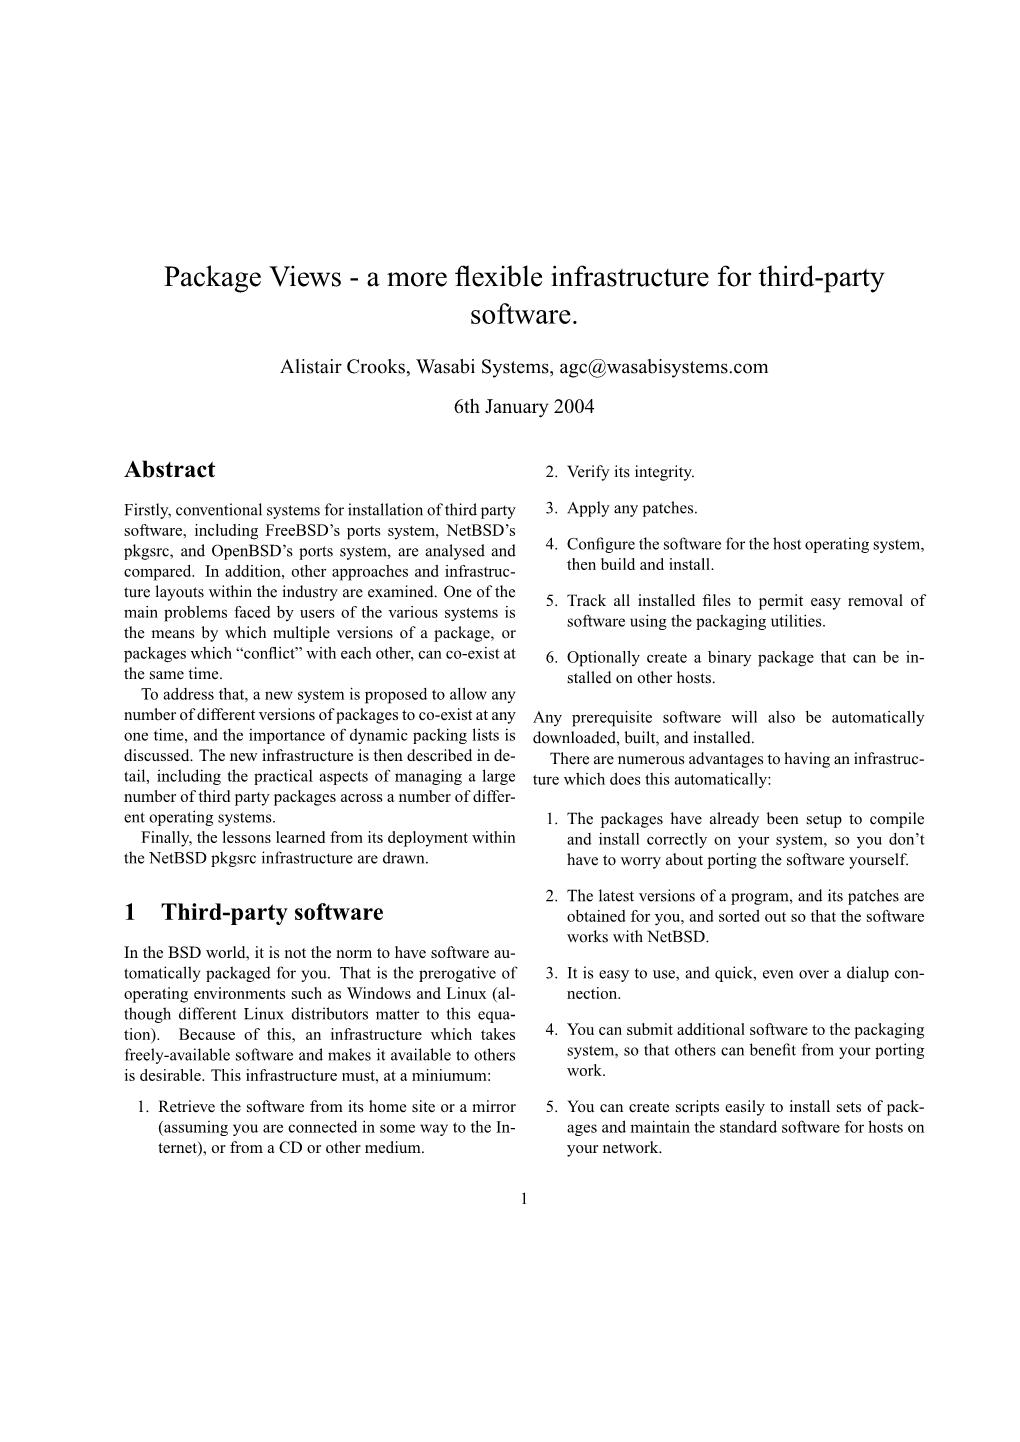 Package Views - a More ﬂexible Infrastructure for Third-Party Software